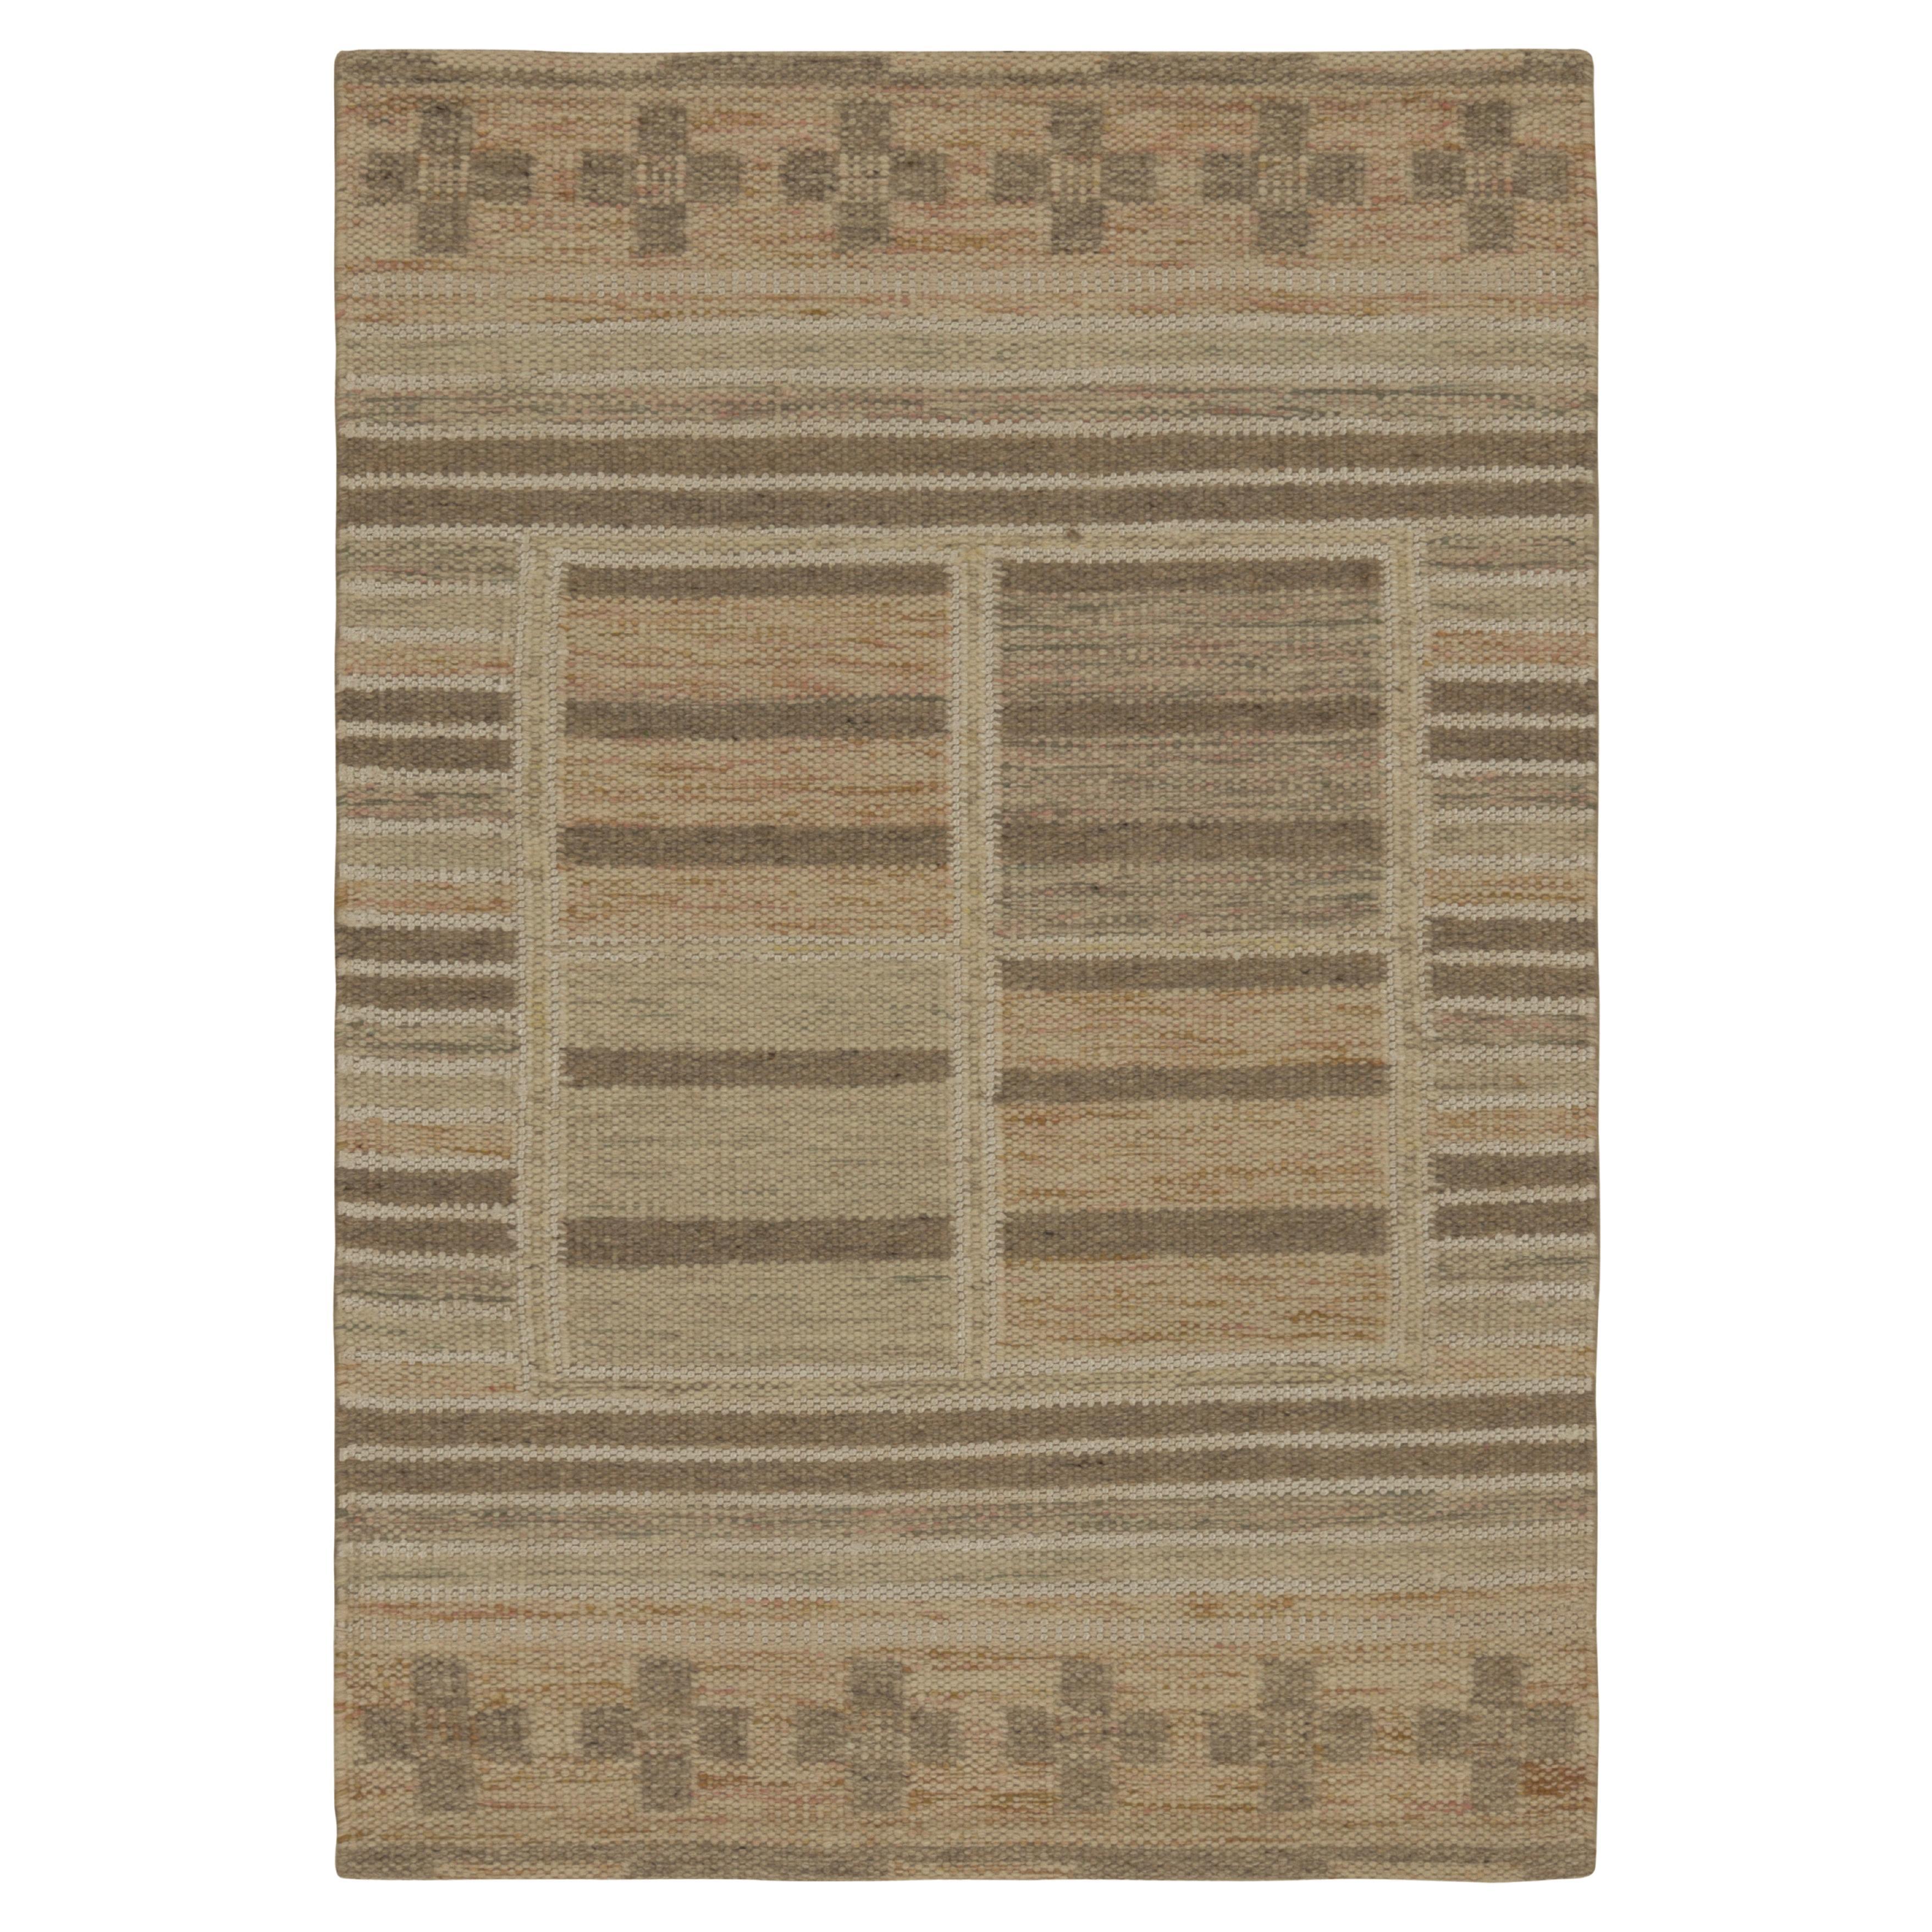 Rug & Kilim’s Scandinavian Style Rug in Beige, with Colorful Geometric Patterns